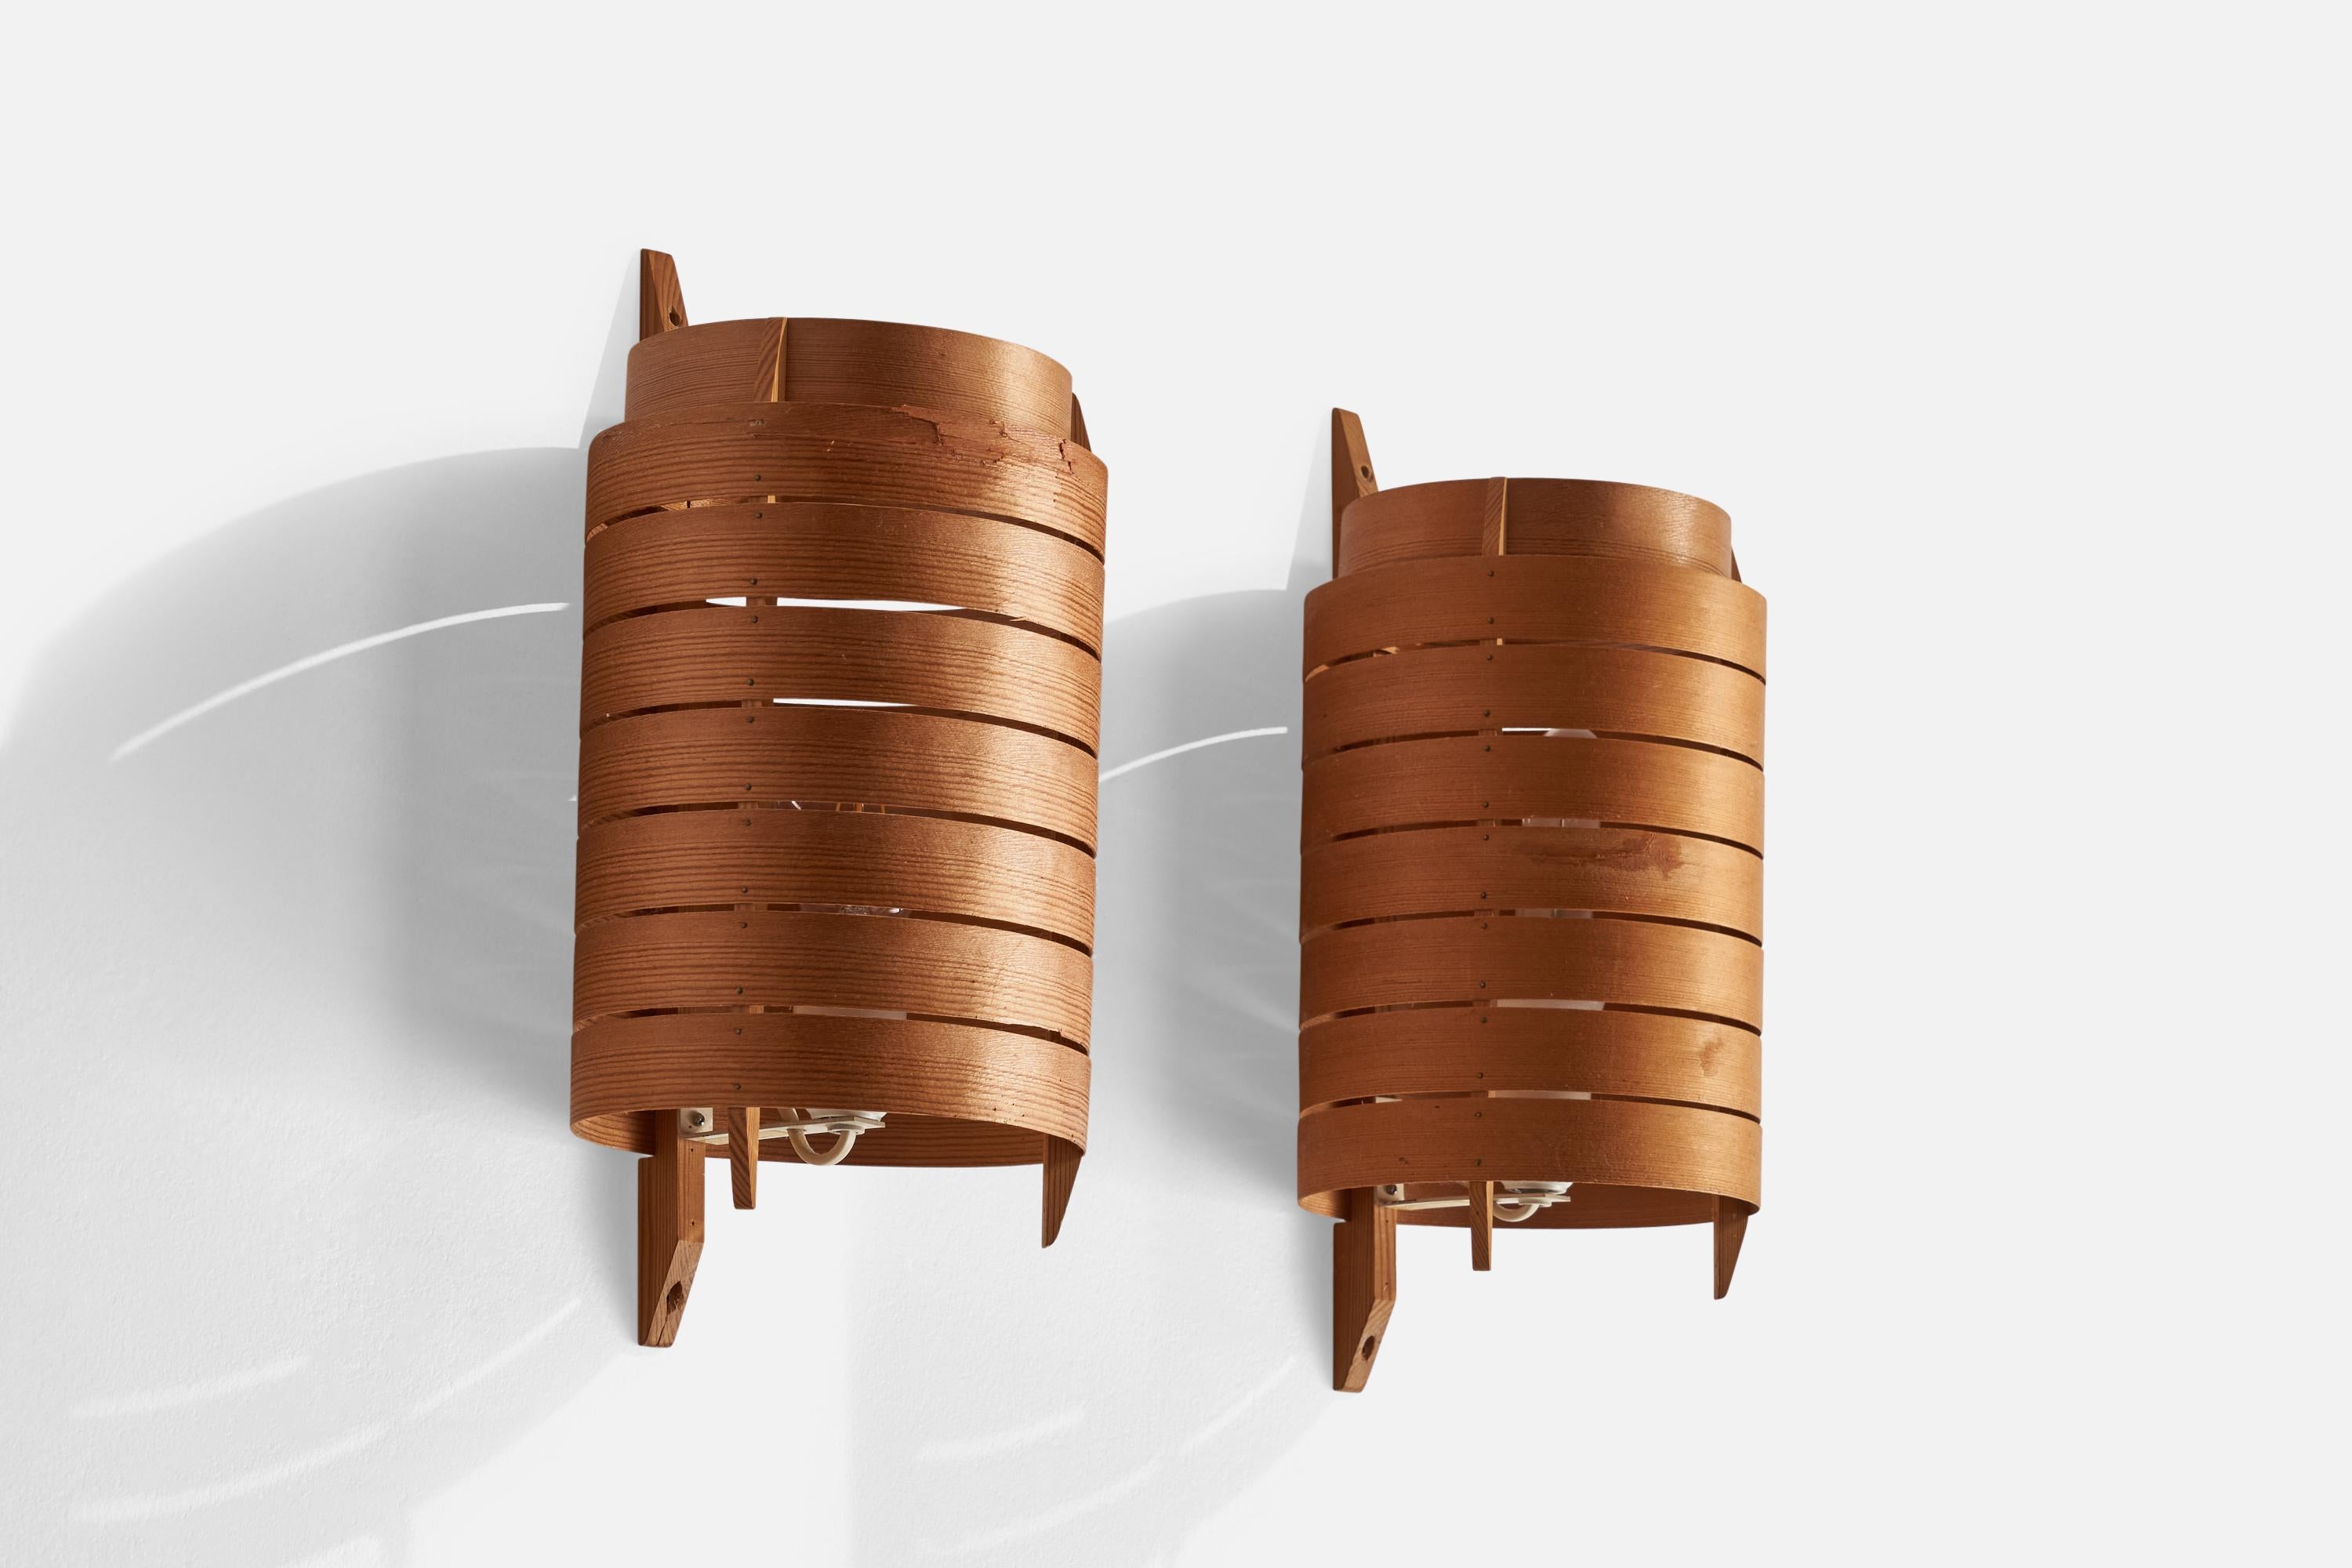 A pair of pine and moulded pine veneer wall lights designed and produced in Sweden, 1960s.

Overall Dimensions (inches): 14.5” H x 6.75”  W x 7” D
Back Plate Dimensions (inches): n/a
Bulb Specifications: E-26 Bulb
Number of Sockets: 2
All lighting